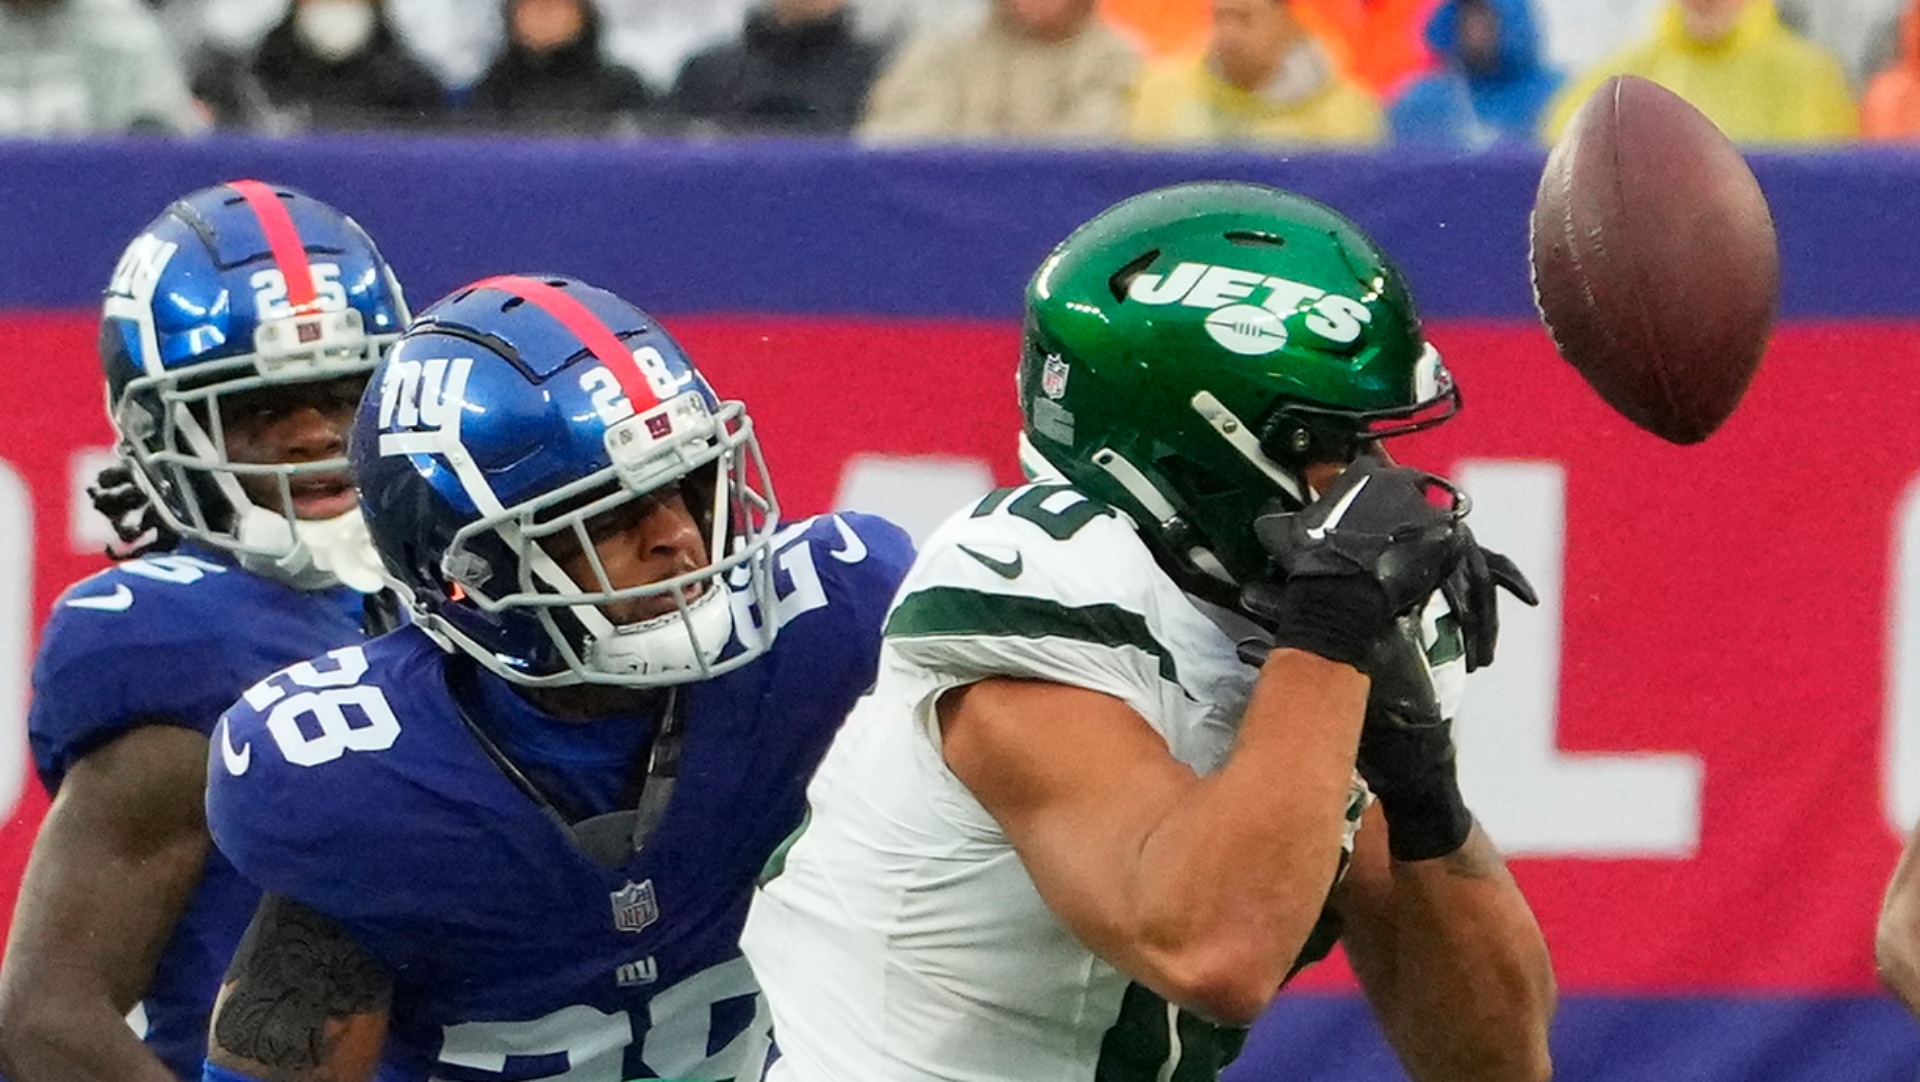 Giants-Jets Concludes As Special Kind Of Brutal Beat For Hosts